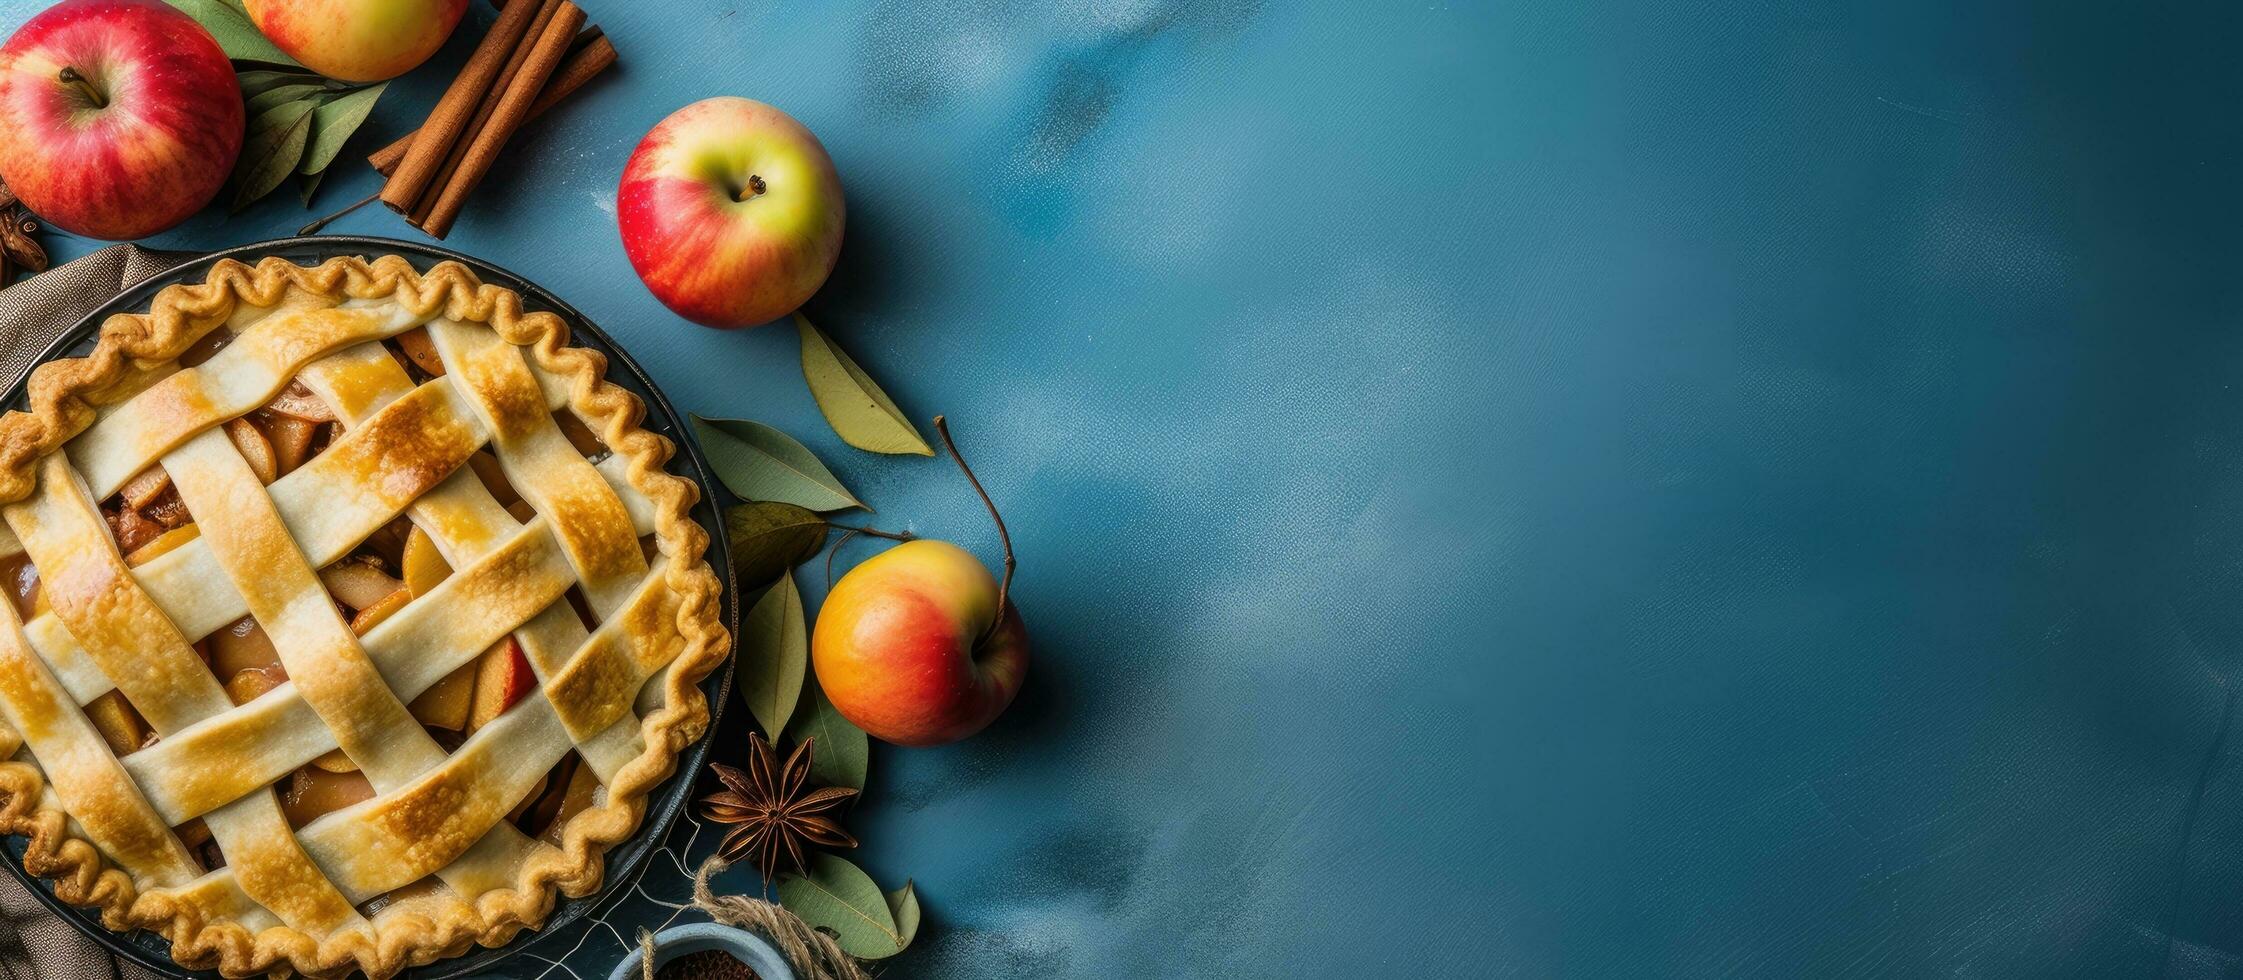 A background image depicting autumn baking with fresh apples, spices, and utensils on a blue table. photo